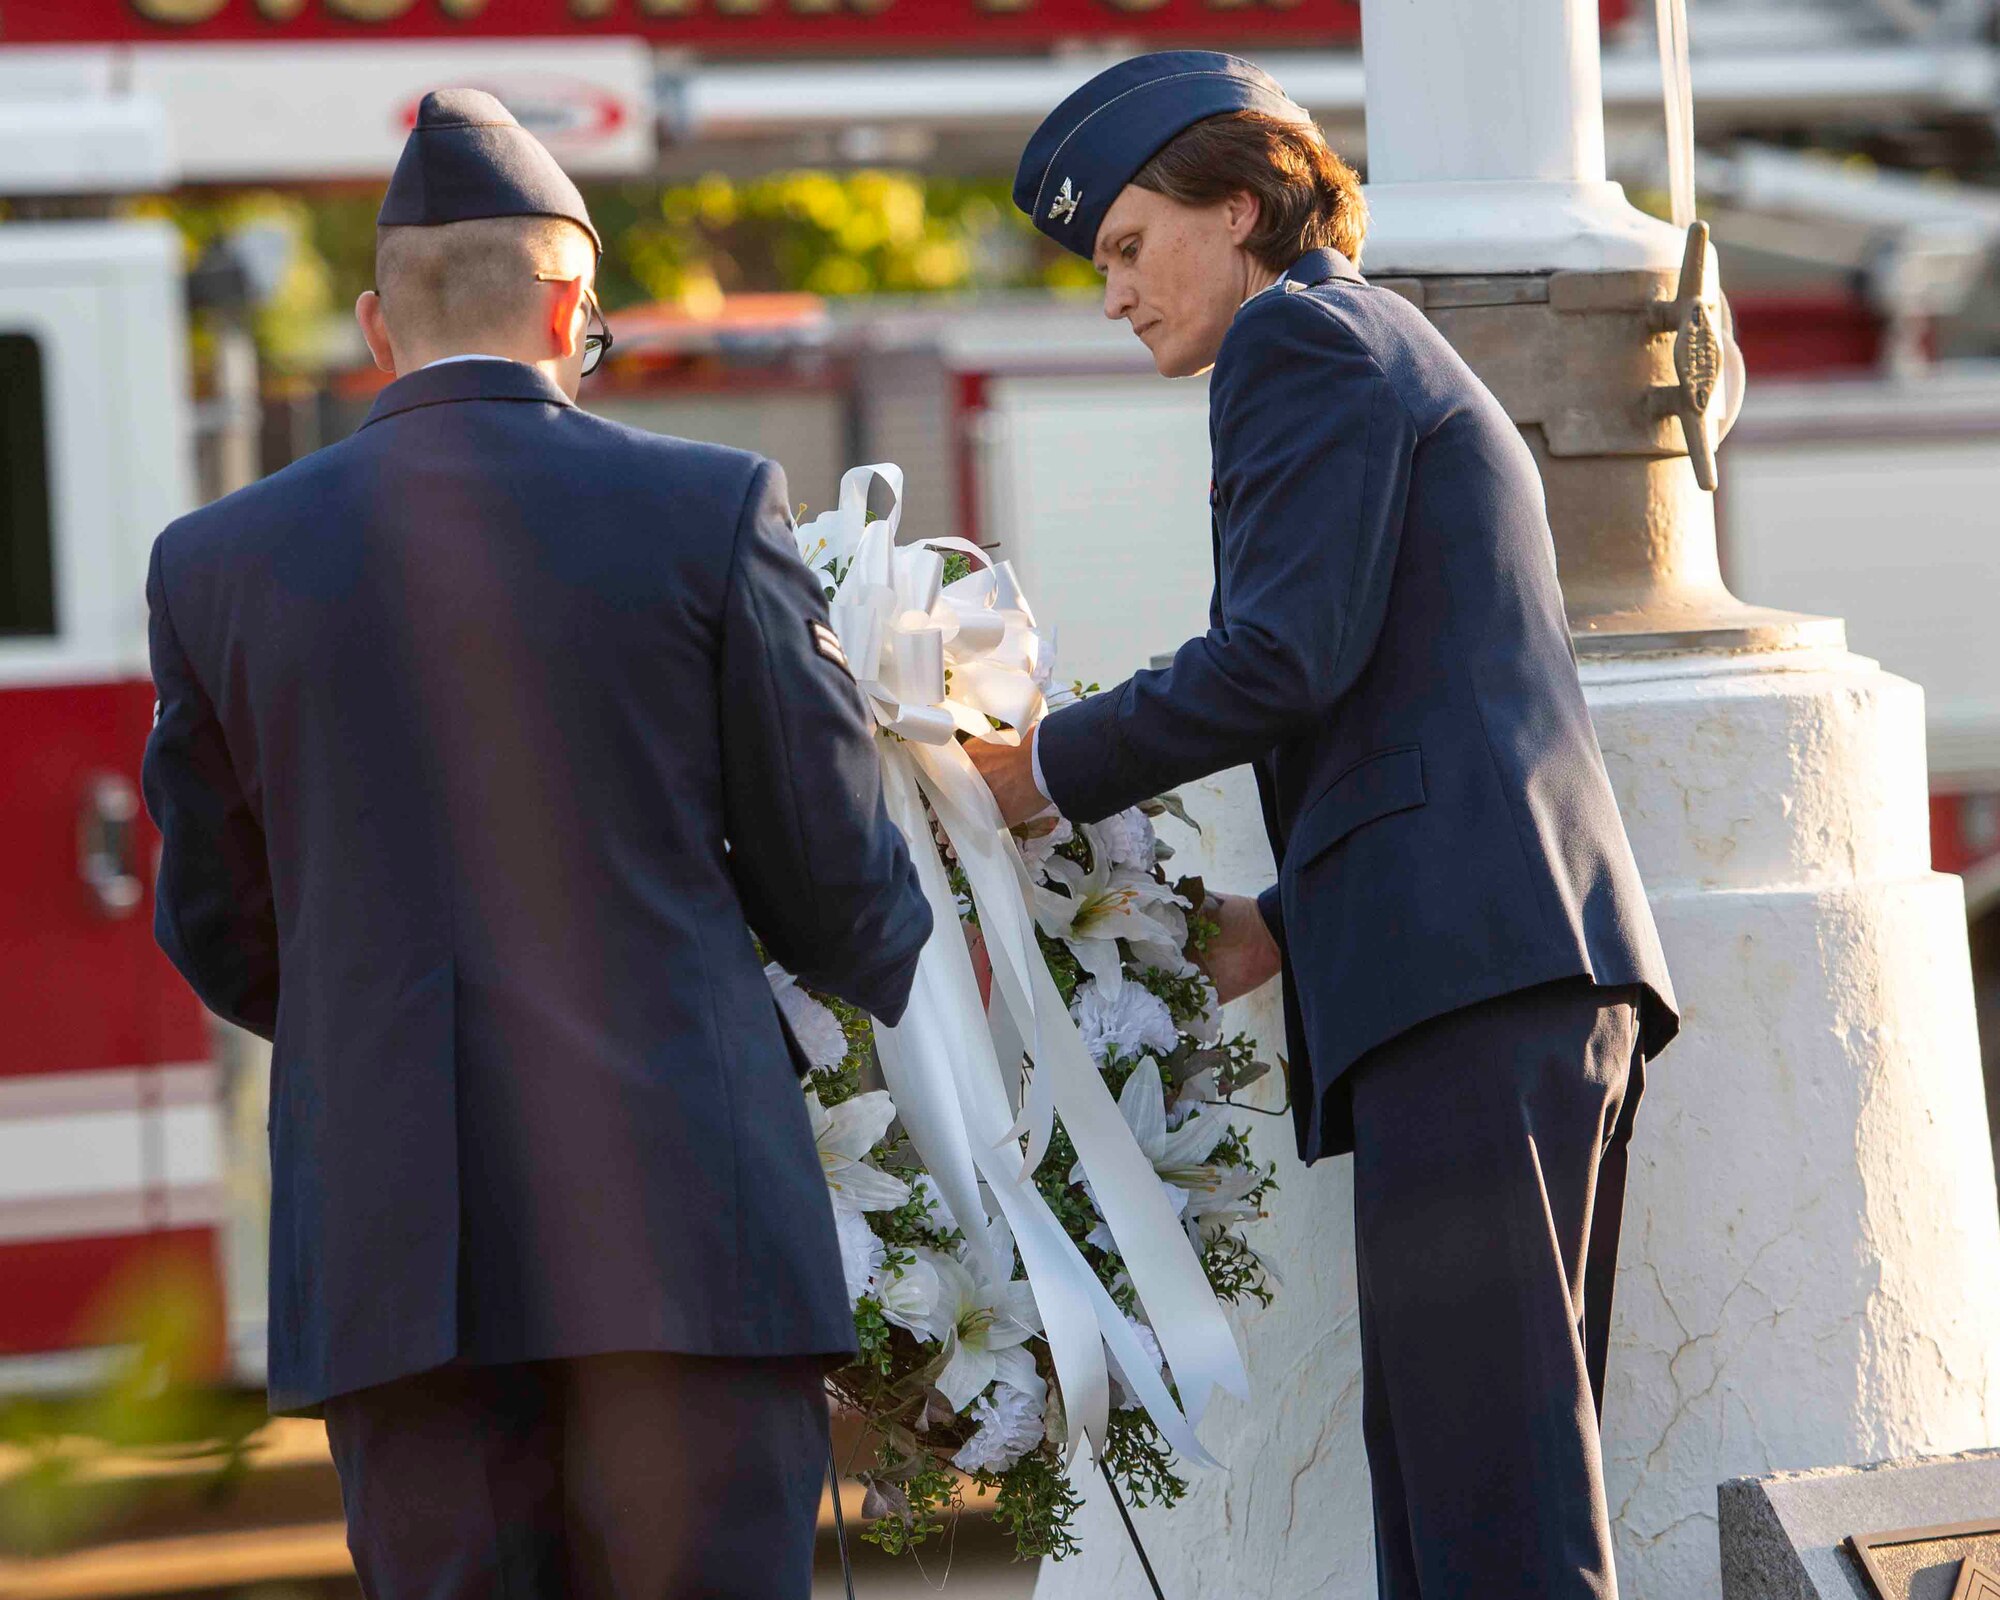 Col. Leslie Maher, 375th Air Mobility Wing commander, lays a wreath during a 9/11 memorial ceremony, Sept. 11, 2018, at Scott Air Force Base, Illinois. The wreath was meant to honor the 2,996 victims of the 2001 terrorist attacks. (U.S. Air Force photo by Airman 1st Class Tara Stetler)